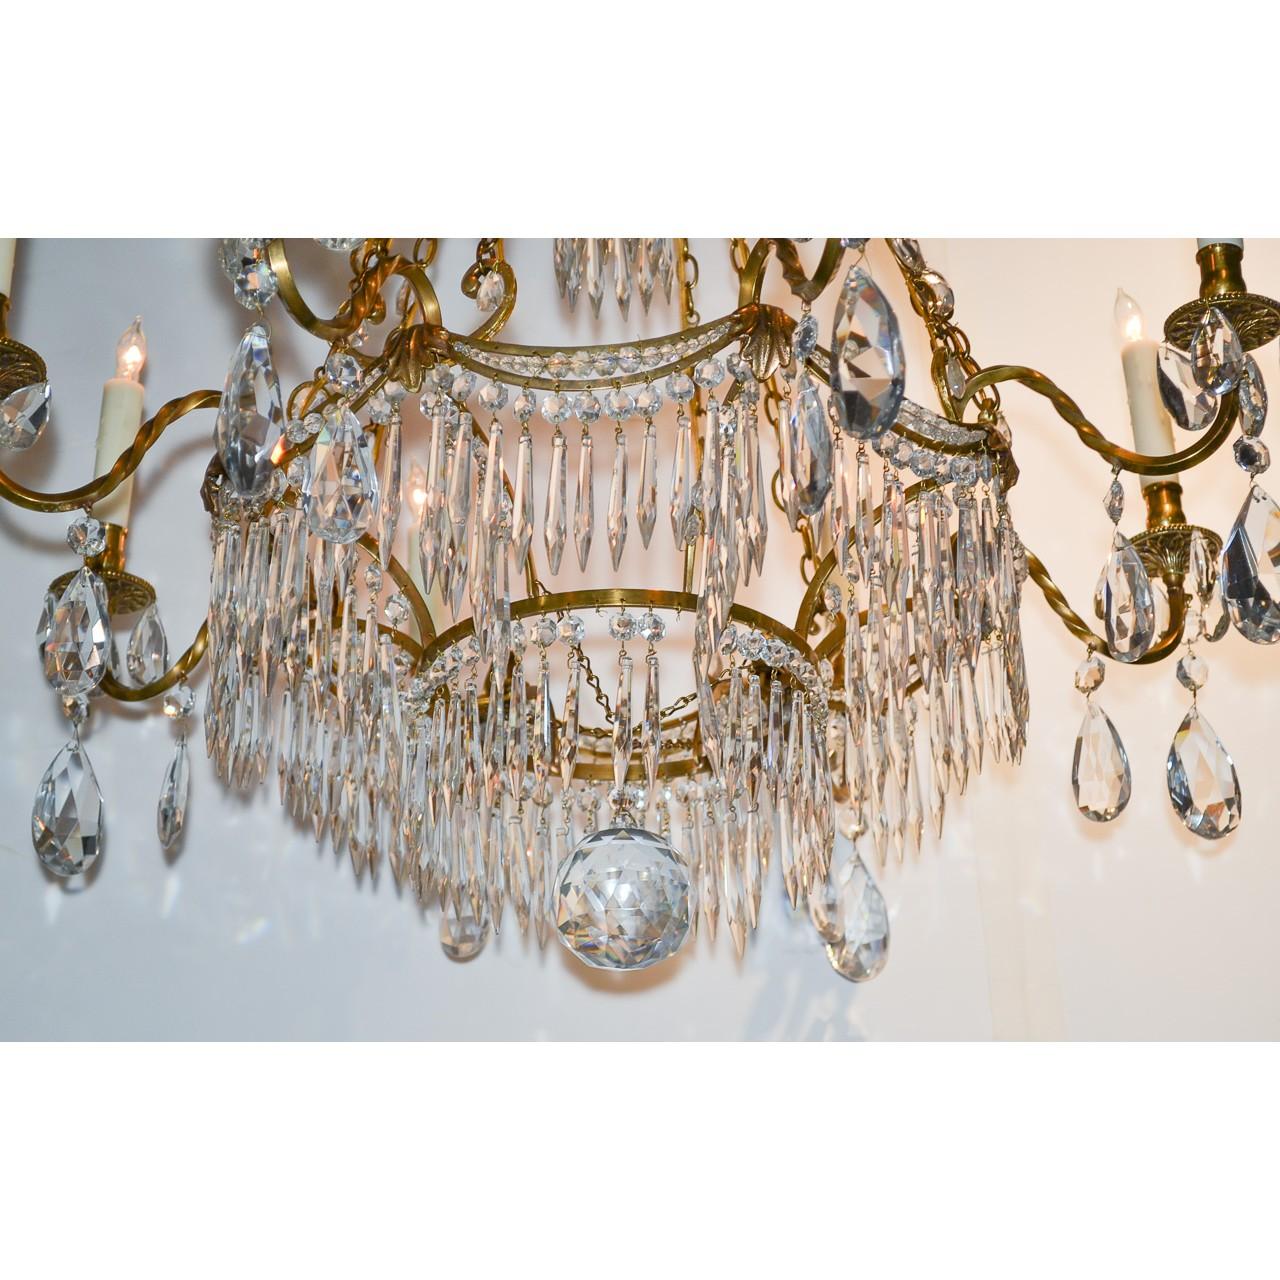 Superior quality 19th century Swedish bronze and crystal chandelier. The large crown with curved arms having dangling spear-shaped and bead crystal prisms holding bronze chains inset with faceted cabochons. The scrolling bronze arms mounted with six